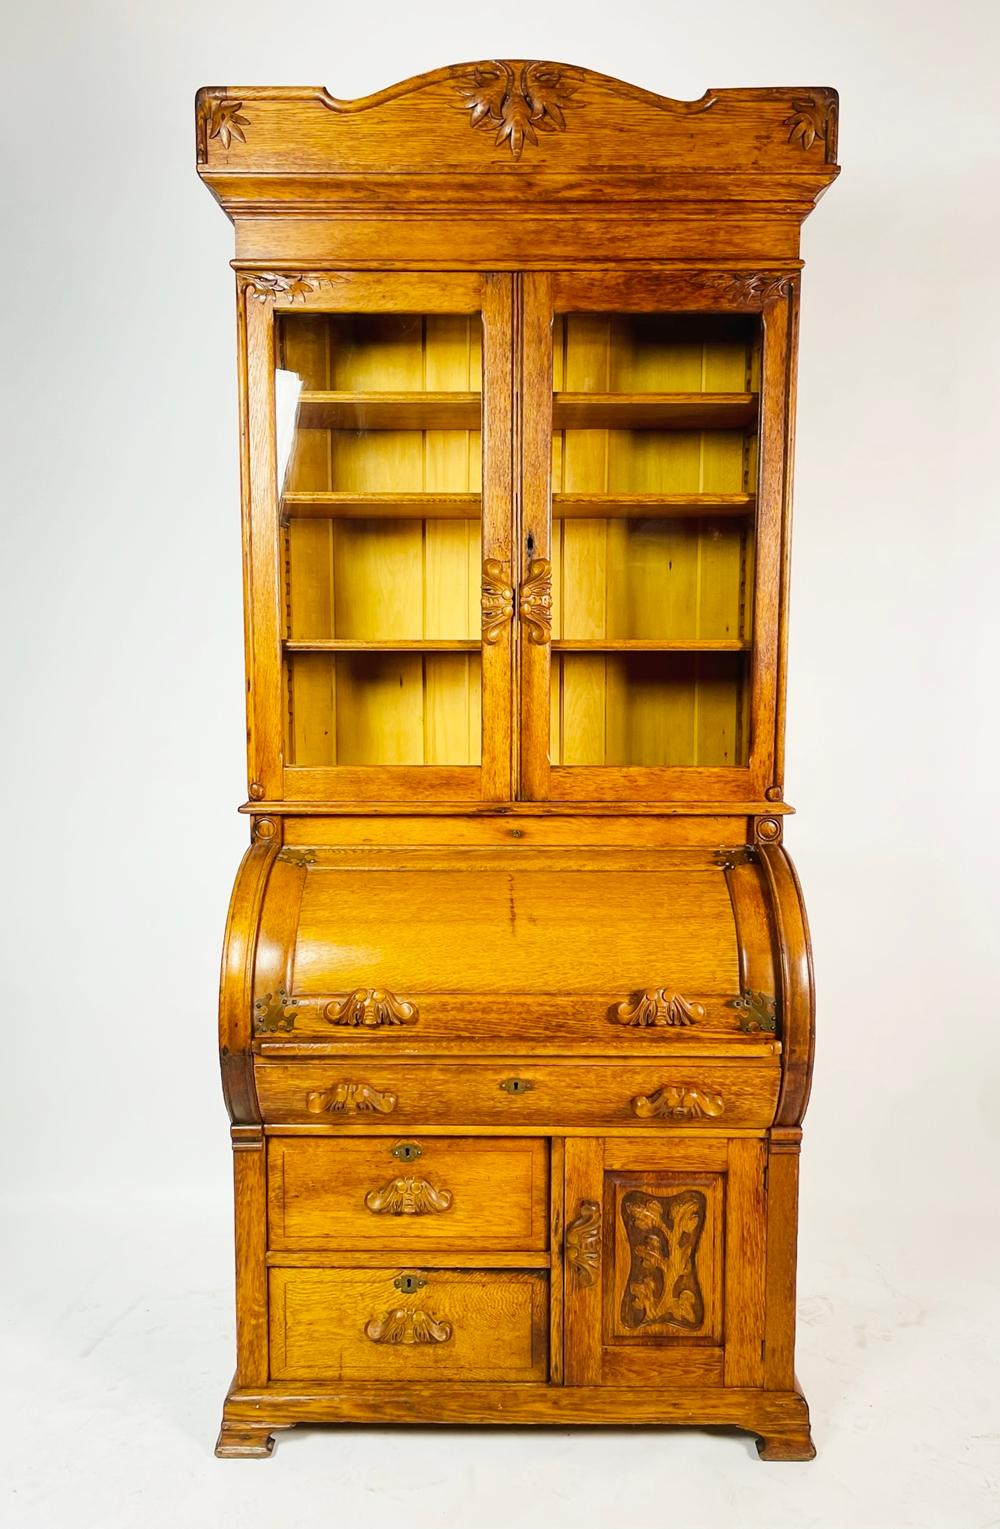 Very nice Eastlake Victorian oak cylinder desk with a bookcase top section. The drawers and door fronts have a beutiful carved details carved as handles. 

Measurements:
91 inches high x 37.50 inches wide x 21.50 inches deep.
The top portion is